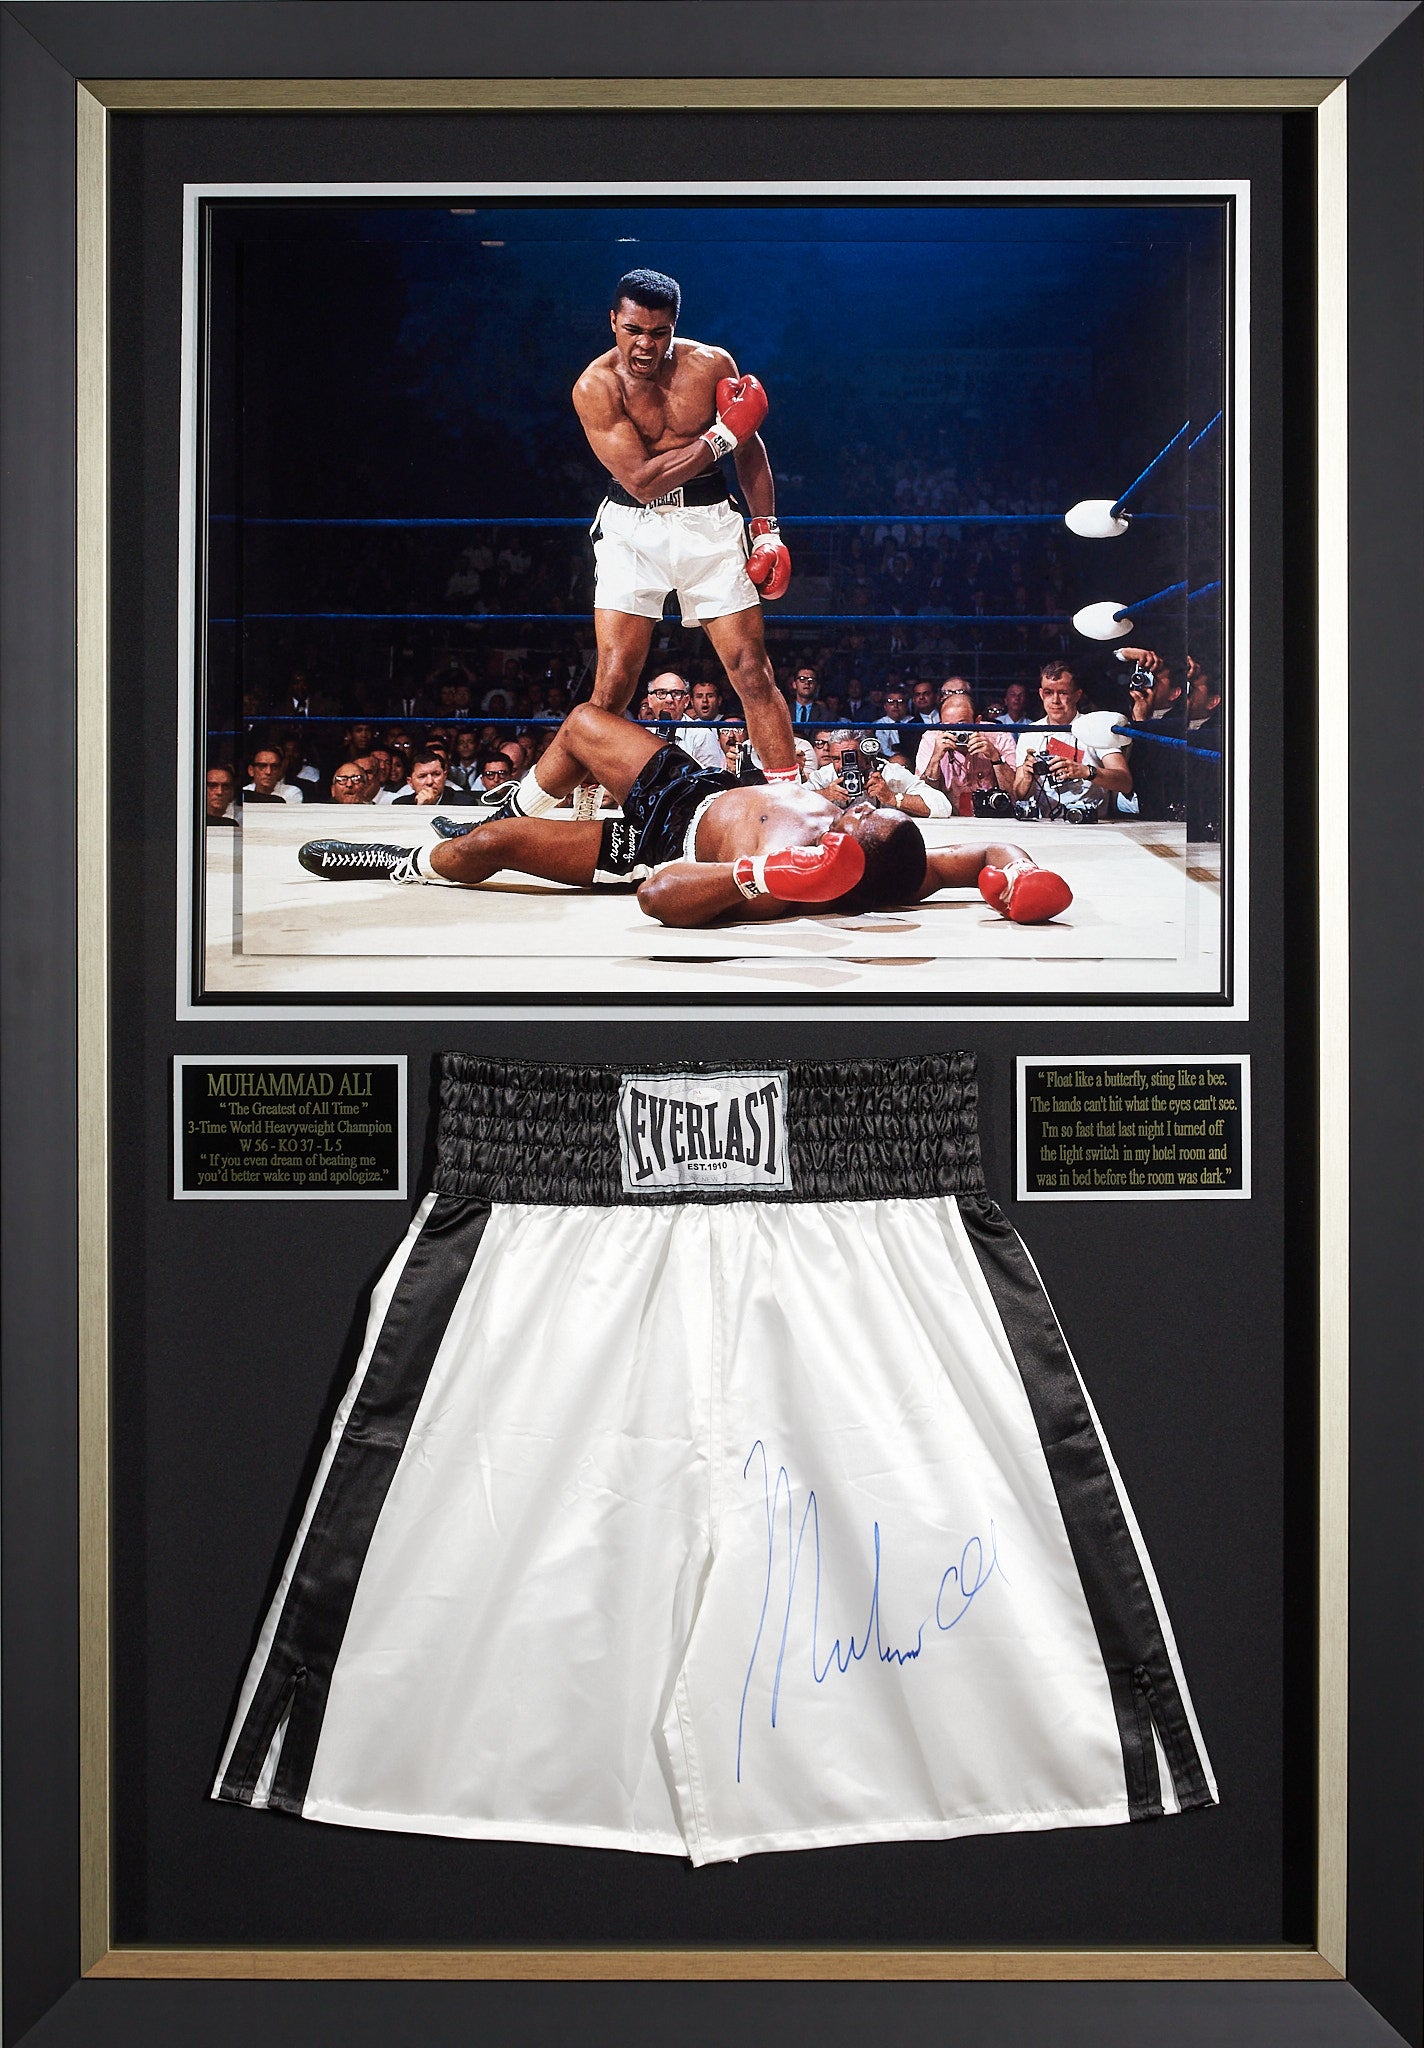 Gallery Ali Millionaire Shorts – Authenticated Boxing JSA with Muhammad signed